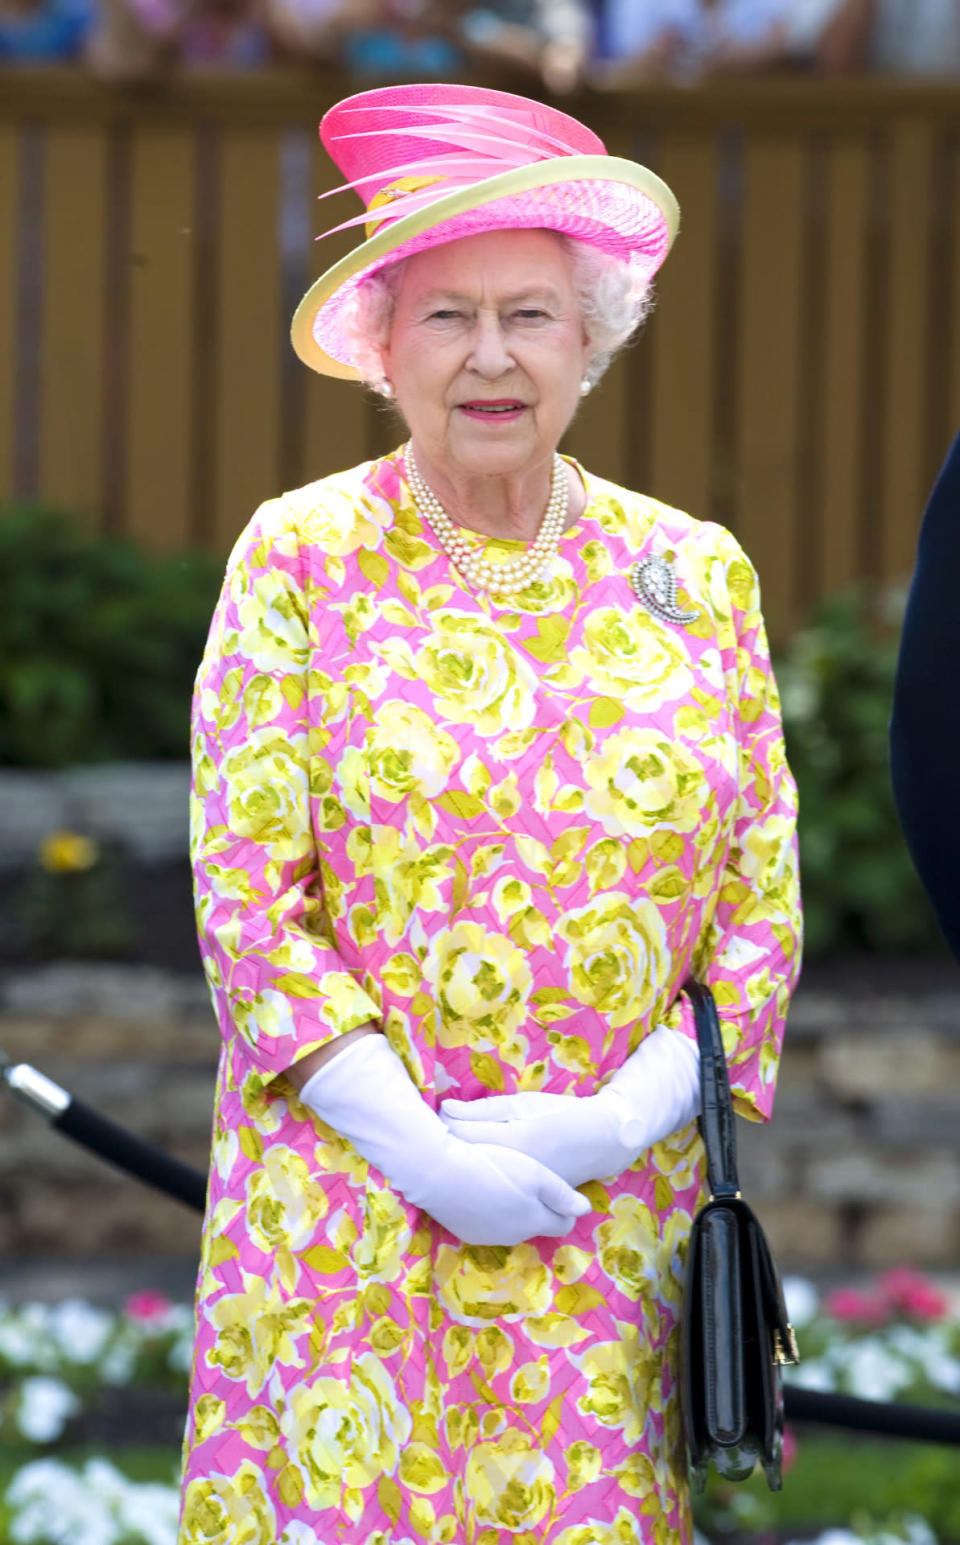 <p>At a lunch in Canada, the Queen donned an eye-catching pink dress covered with yellow flowers. <i>[Photo: Rex]</i></p>